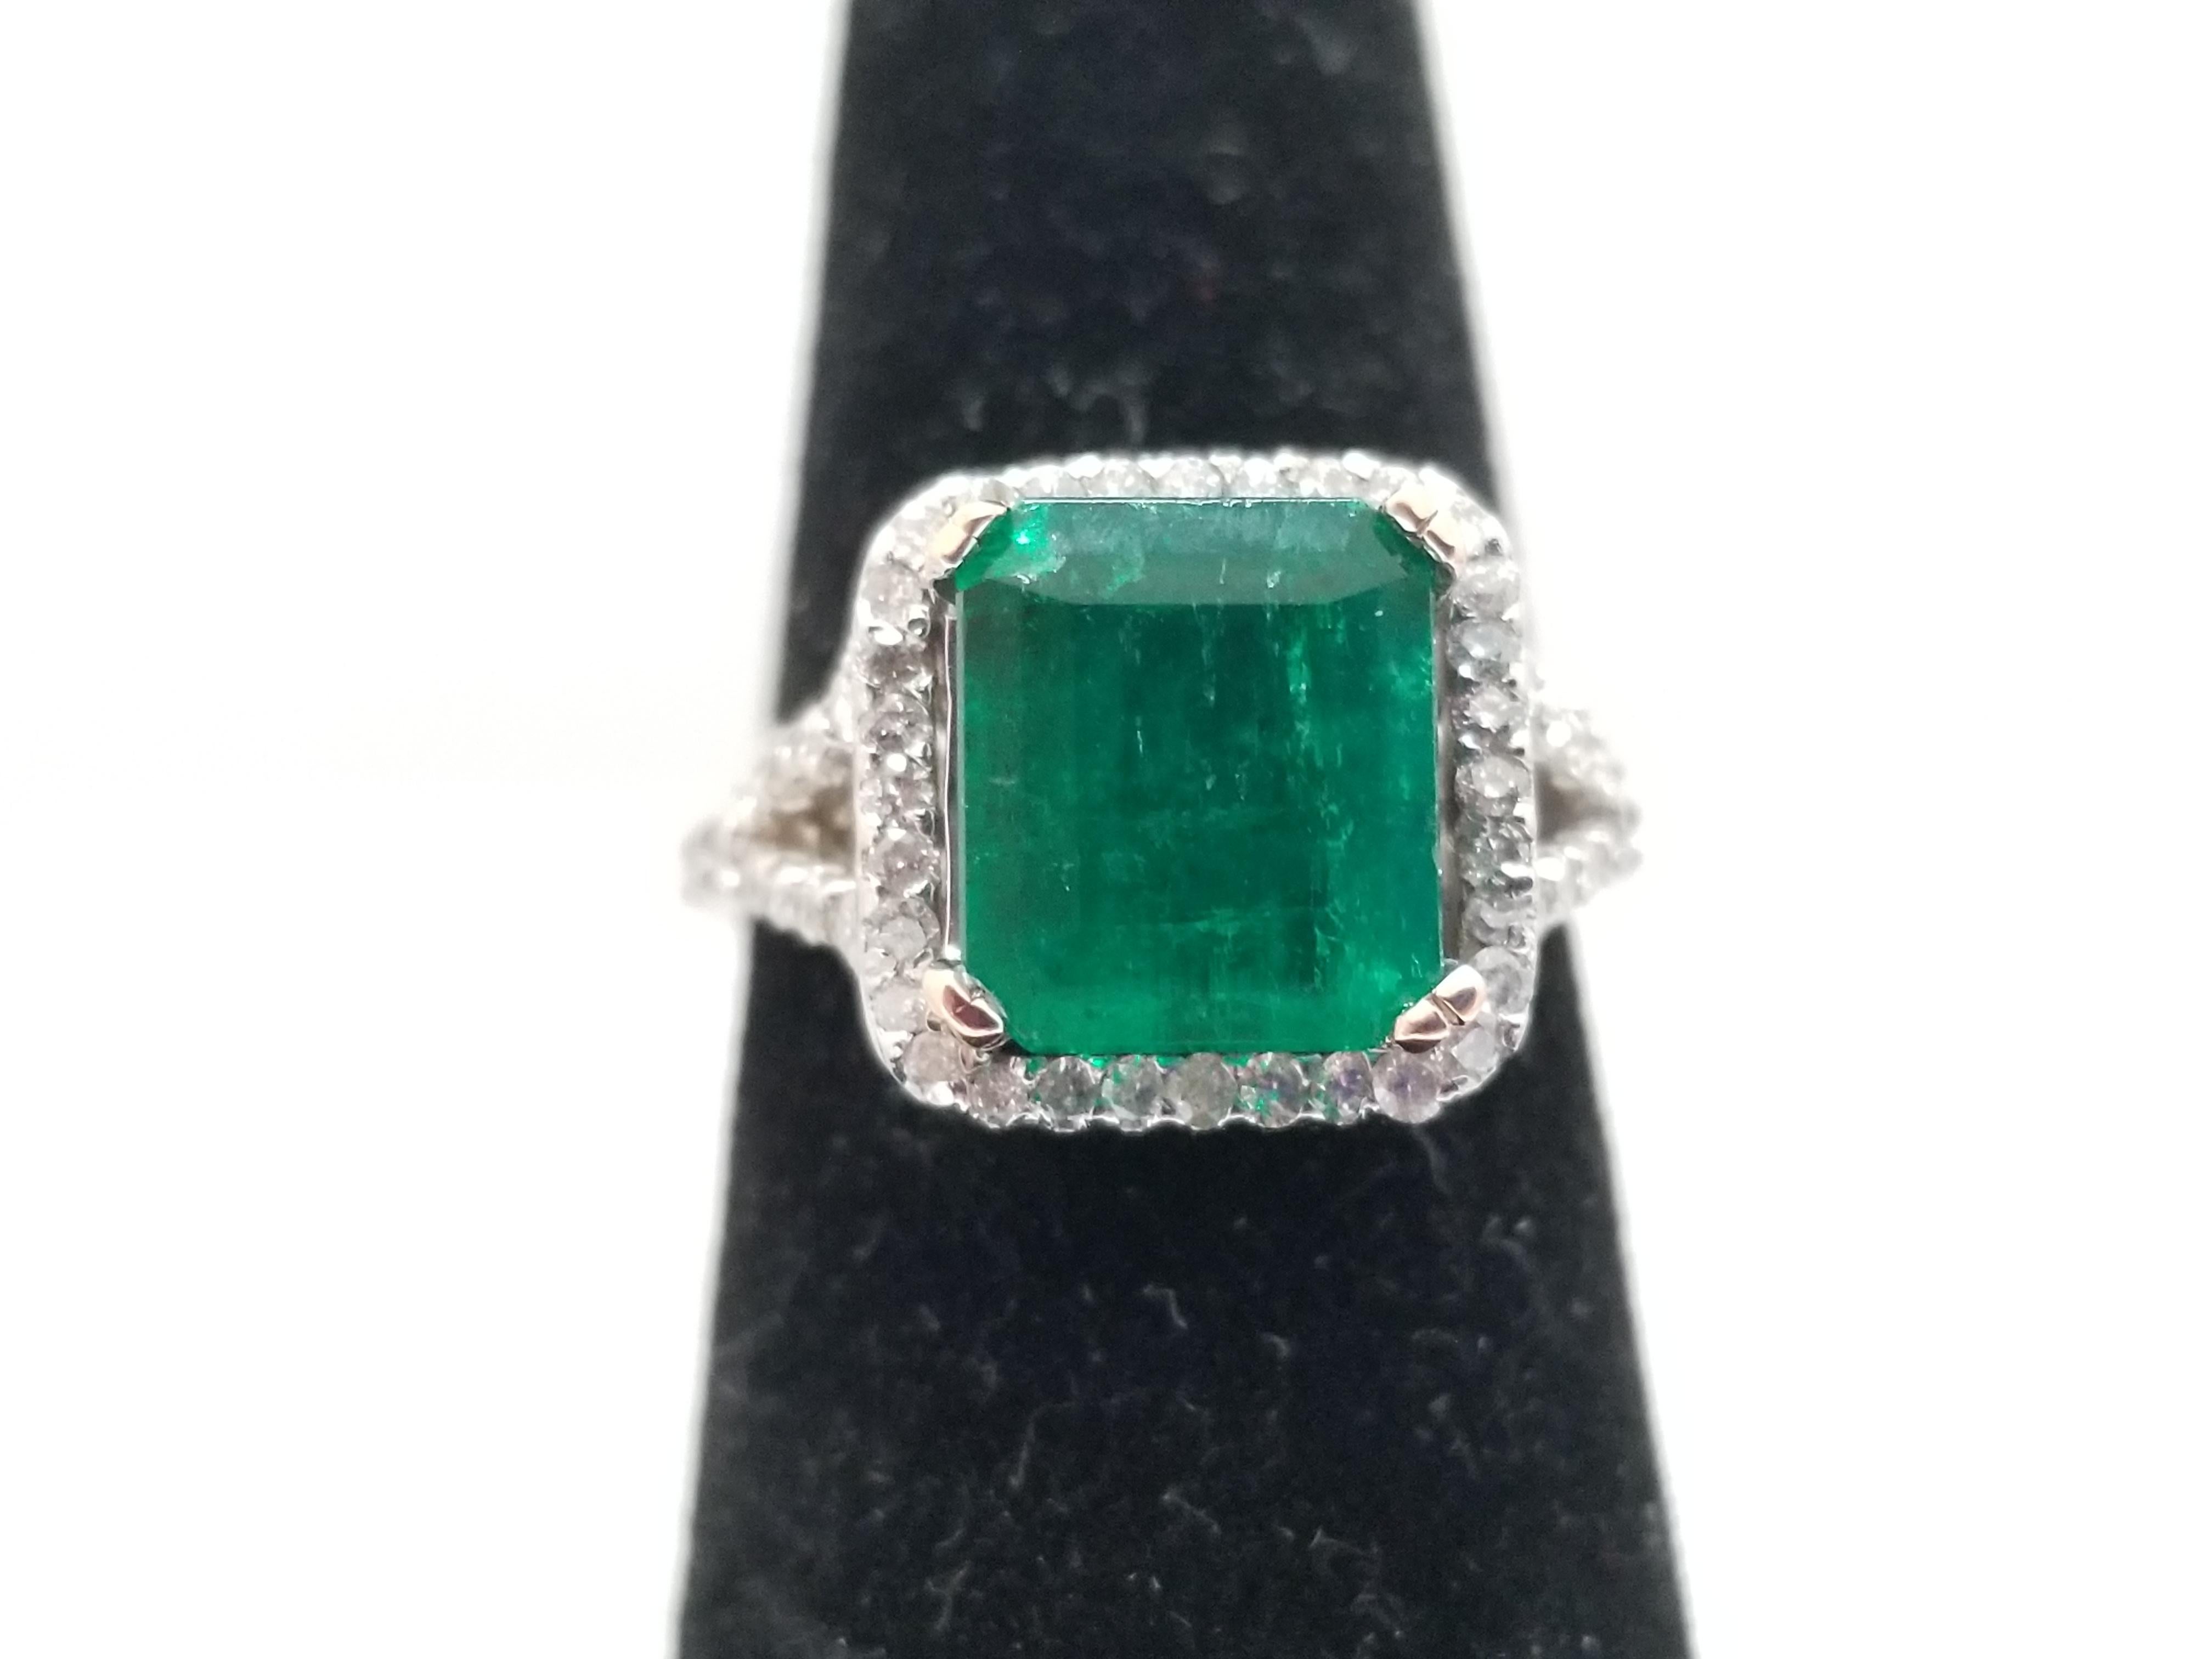 Beautiful 2.28 carats of Colombian Emerald, white diamond band total weight 0.78 carats. Set on 4 prong 14k white gold. Ring Size 6.5. Exquisite style for every day.